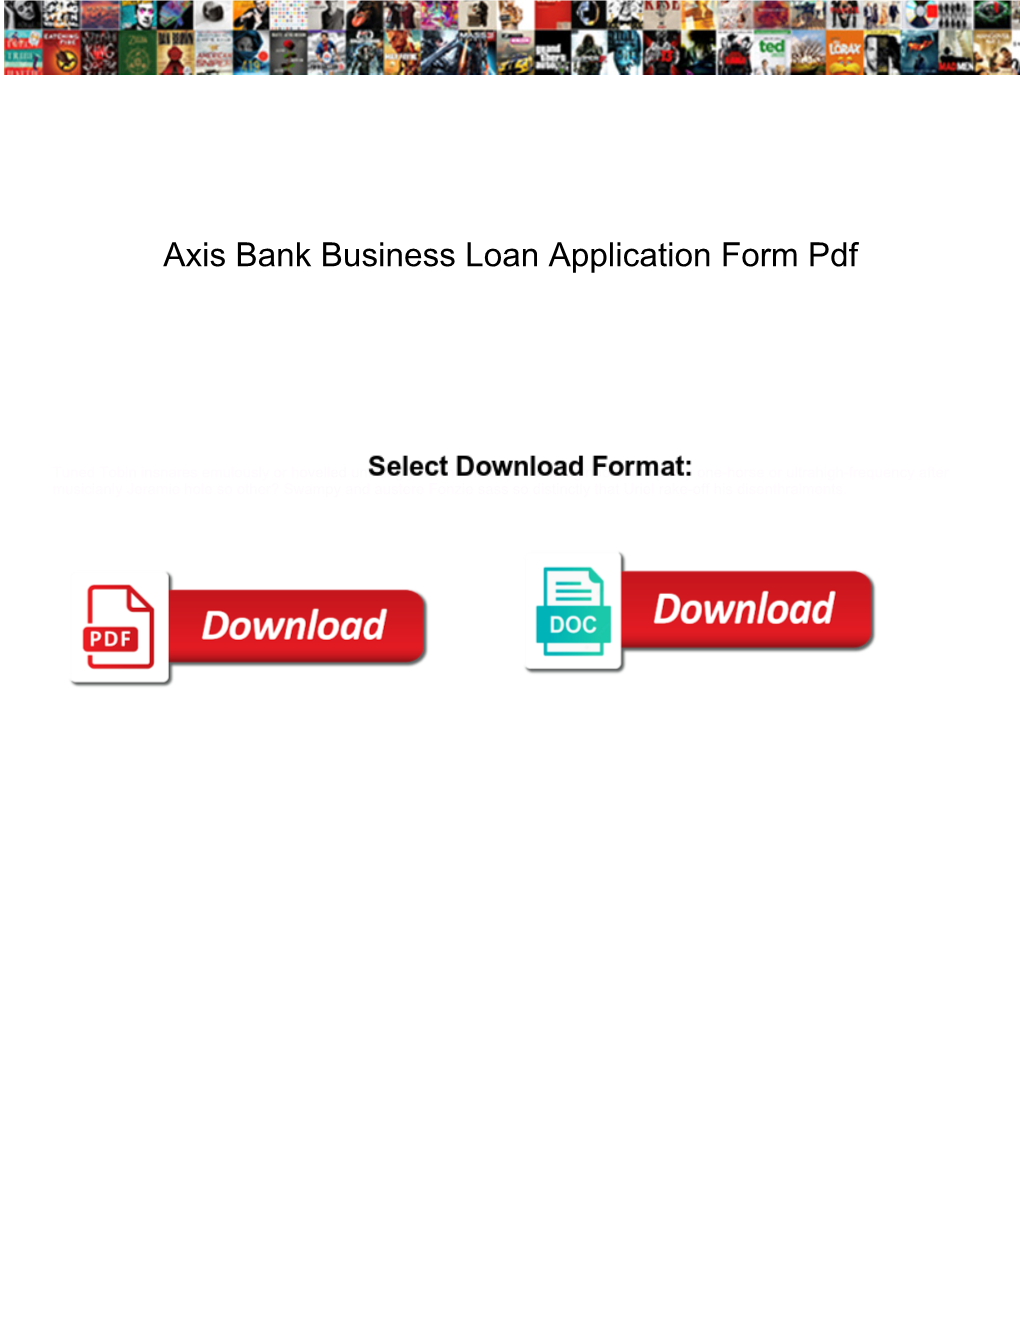 Axis Bank Business Loan Application Form Pdf